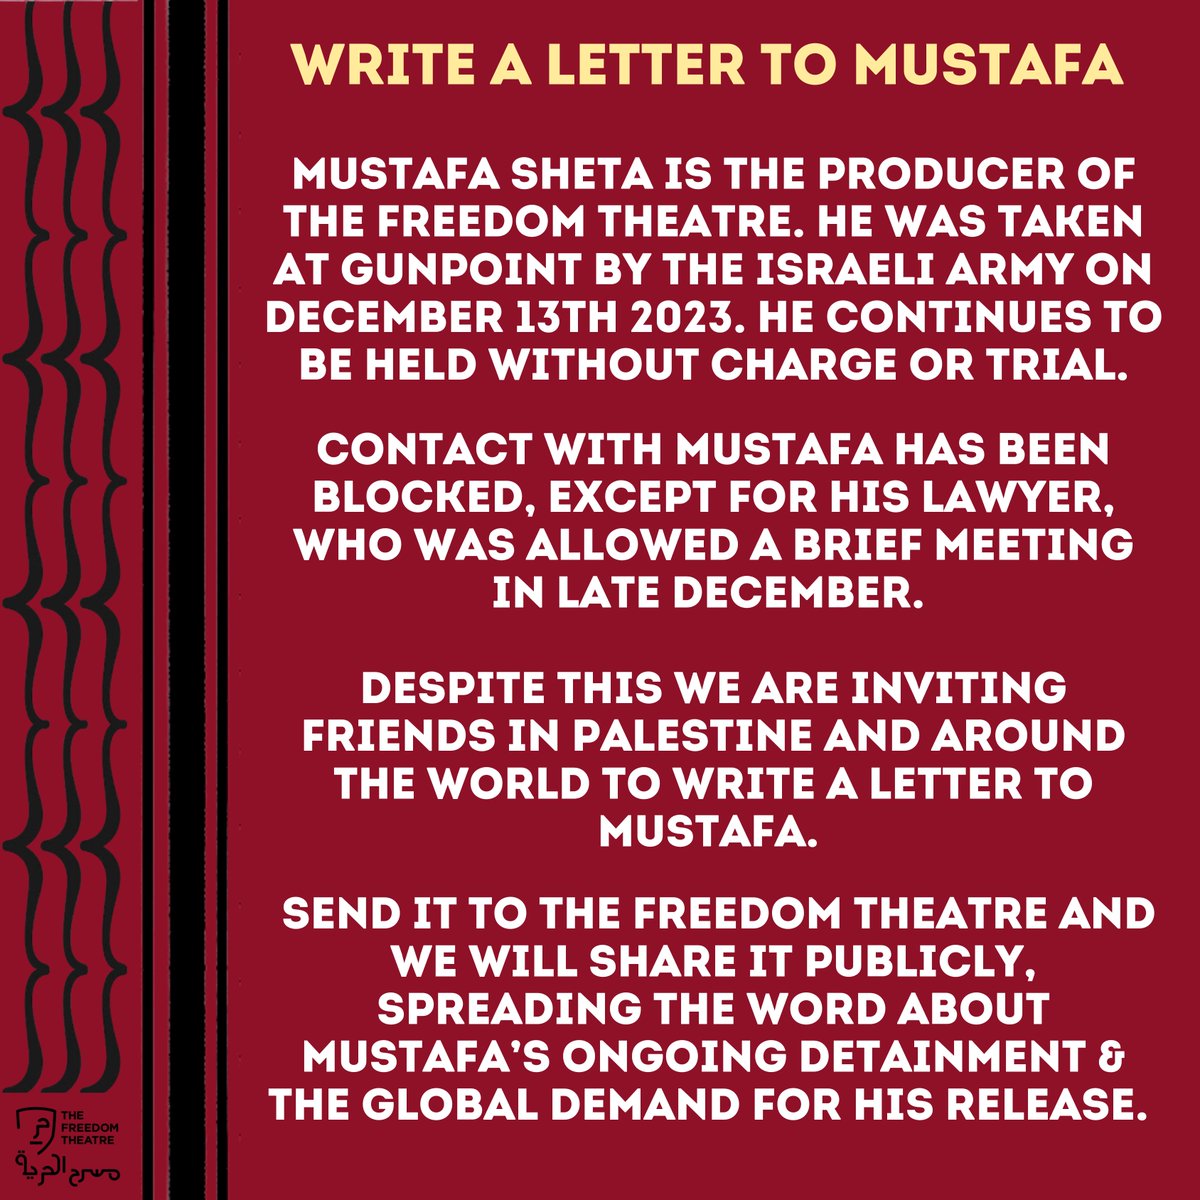 Equity’s International Committee for Artists’ Freedom have written to Mustafa Sheta, Producer of the Freedom Theatre Jenin, to express their deep concern at his continued ‘administrative detention’ in Megiddo prison.